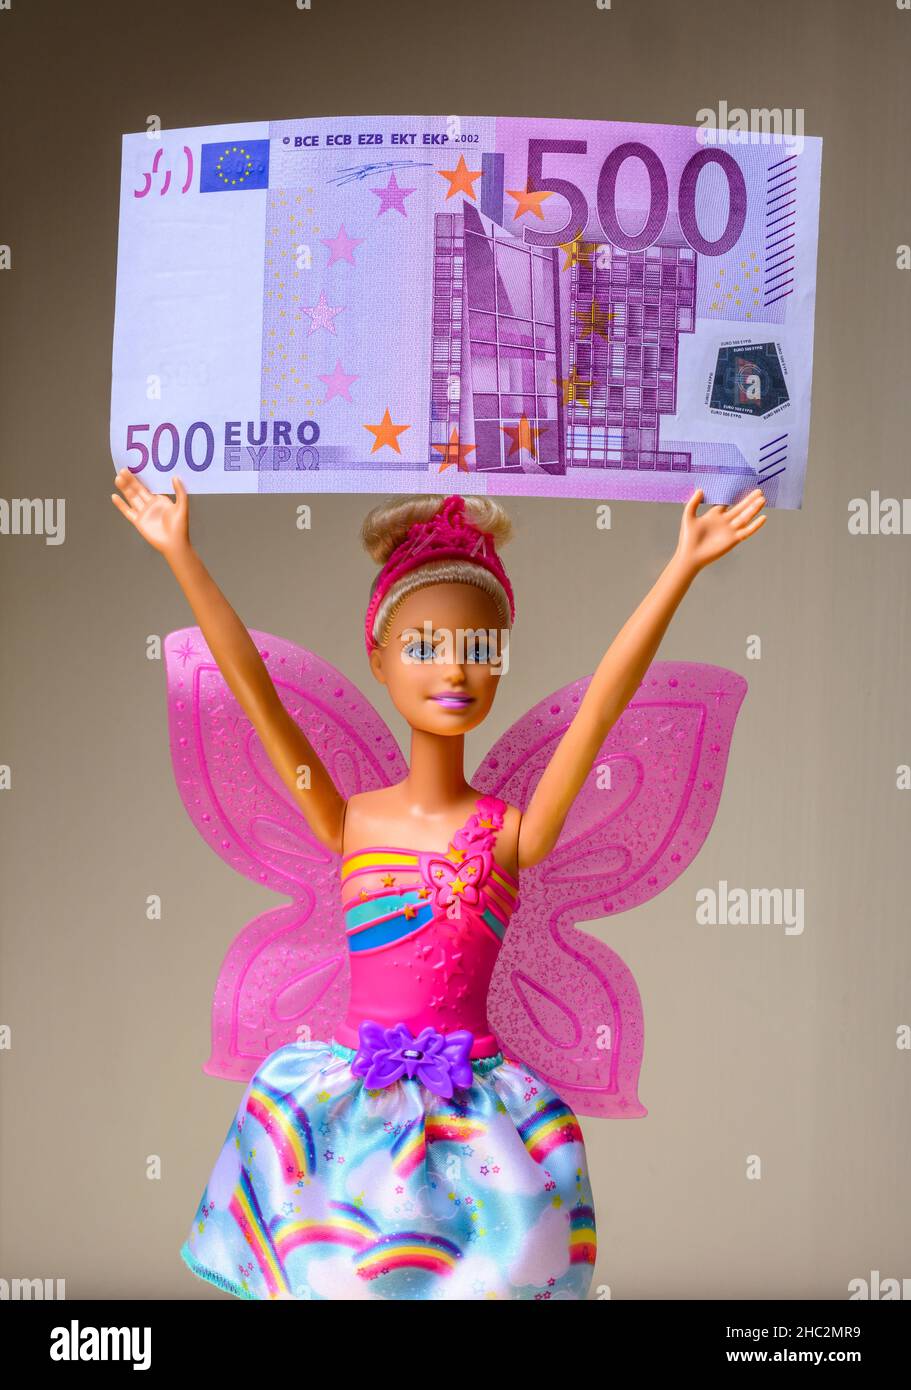 Barbie doll holding a 500 Euro banknote, Stock Photo